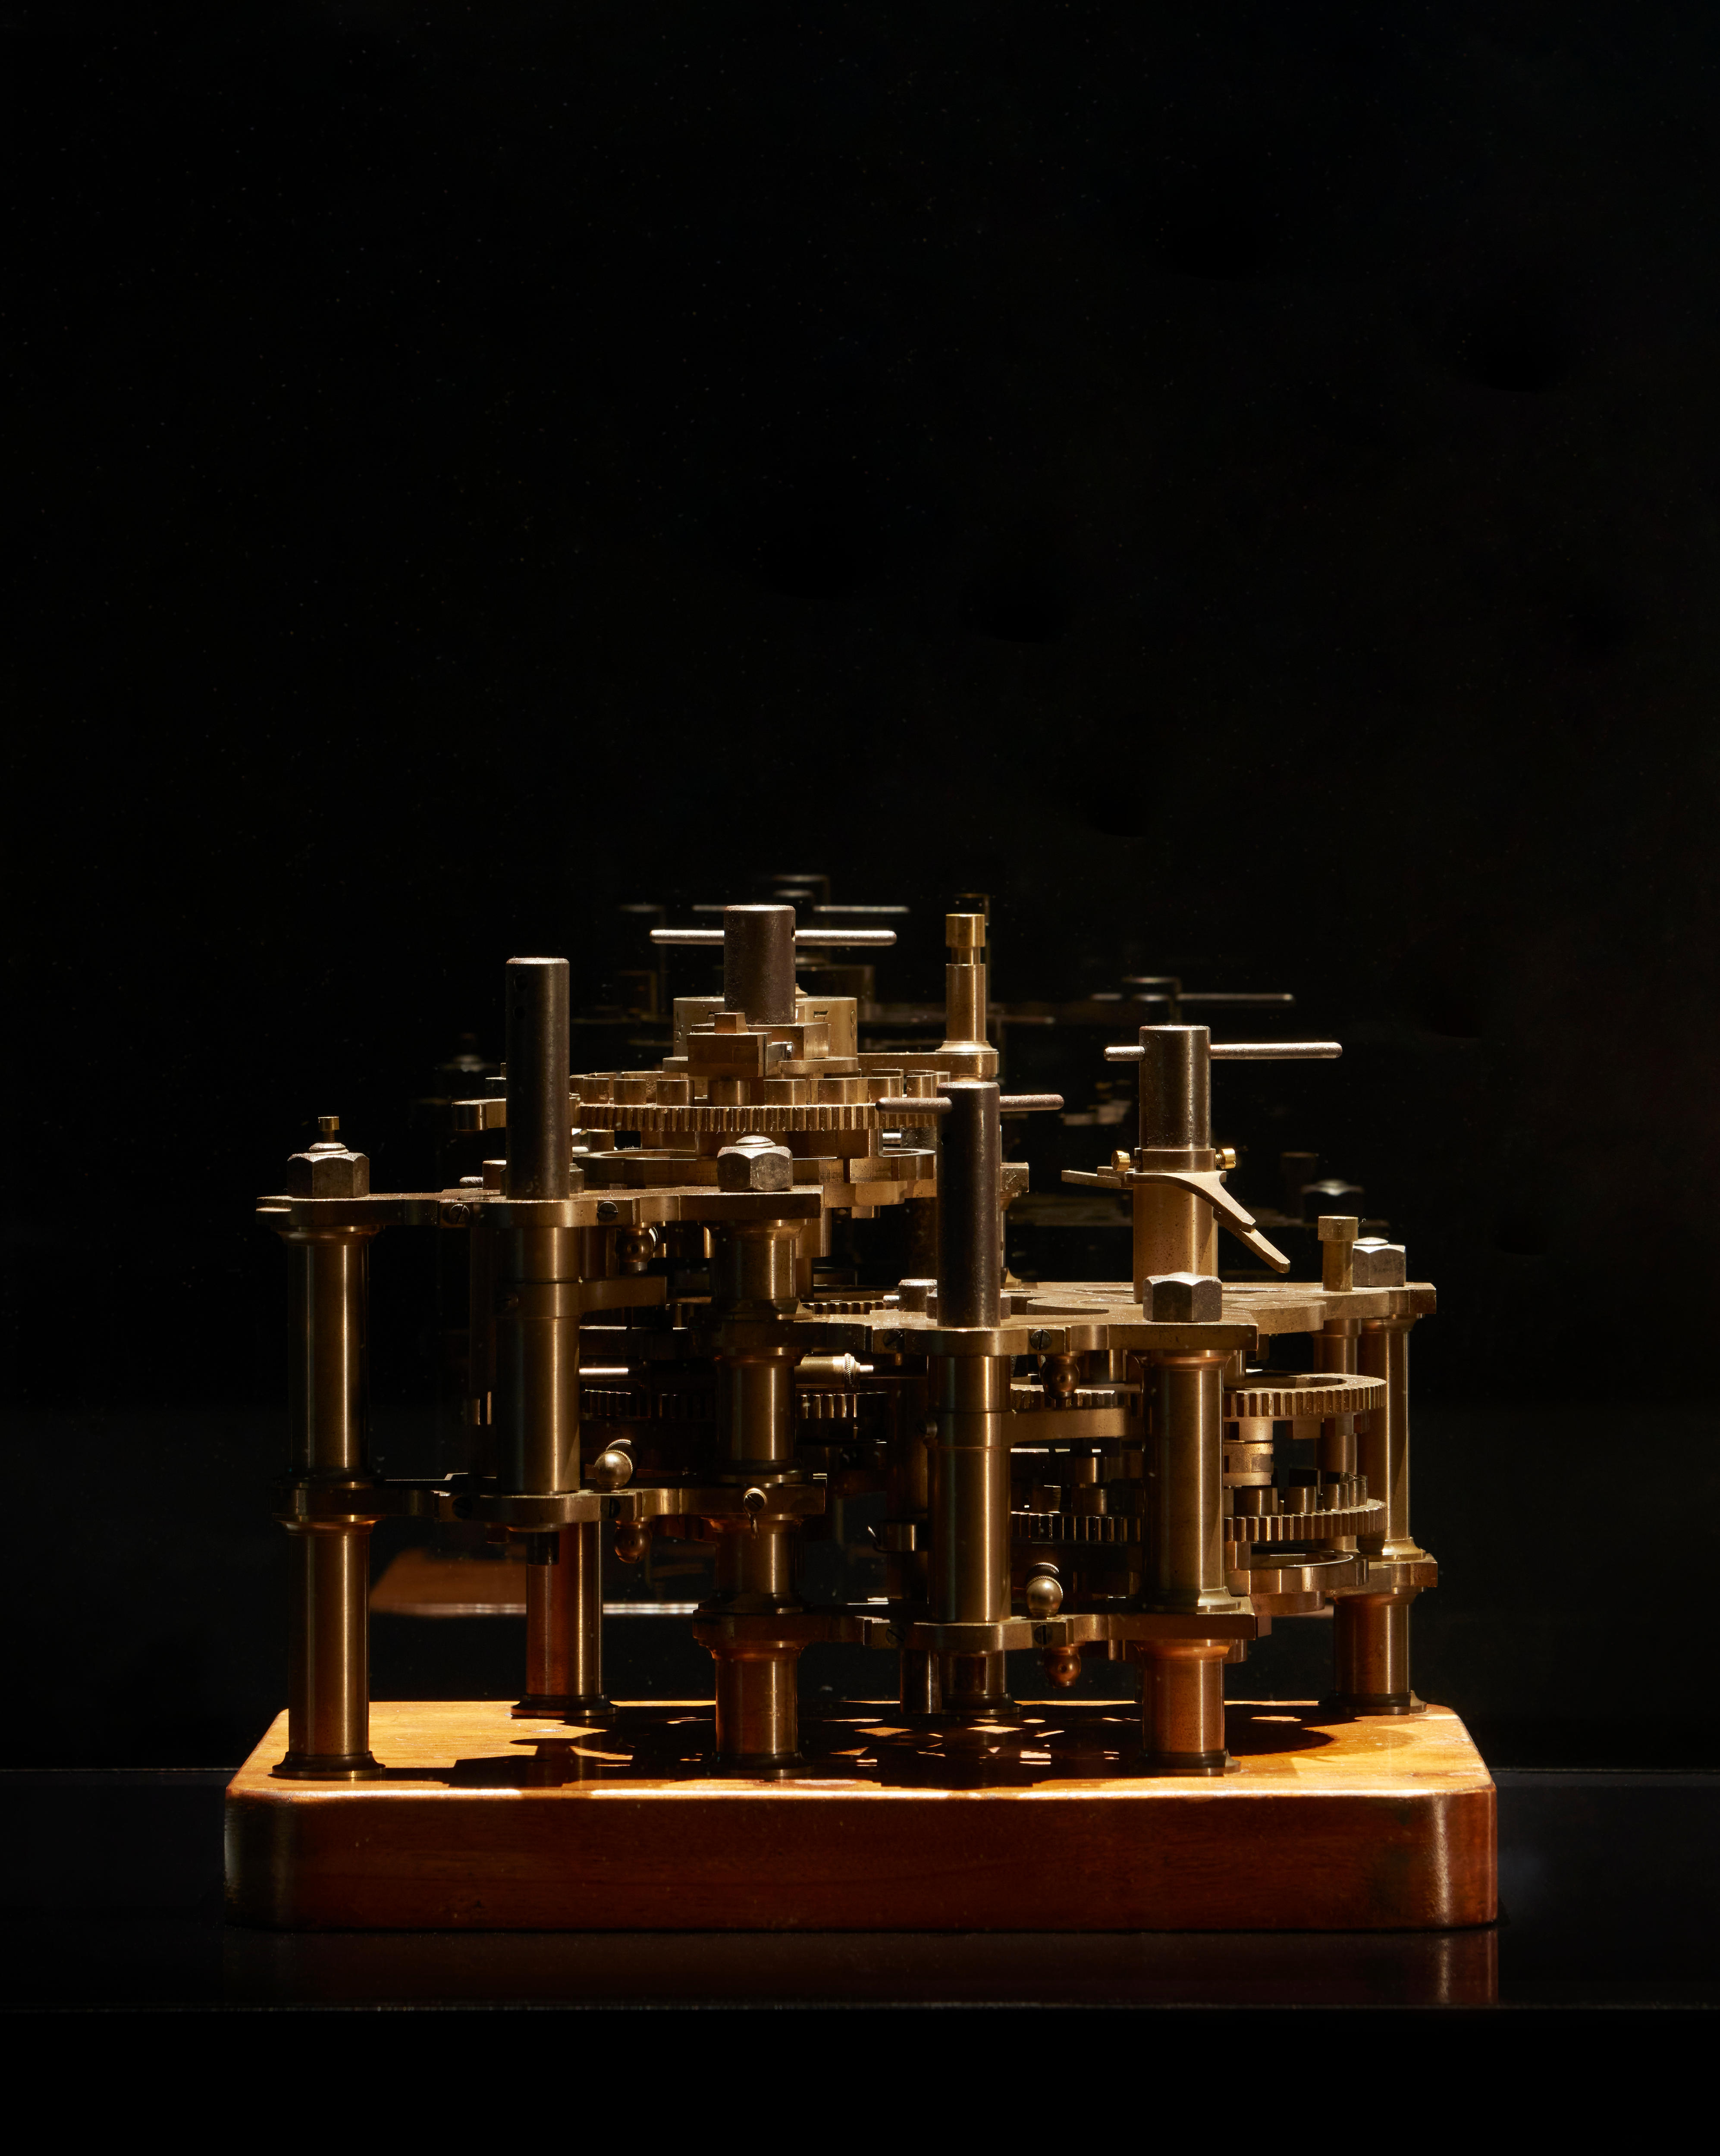 A 19-century calculating engine made from bronze, steel and wood, sitting in a display cabinet.